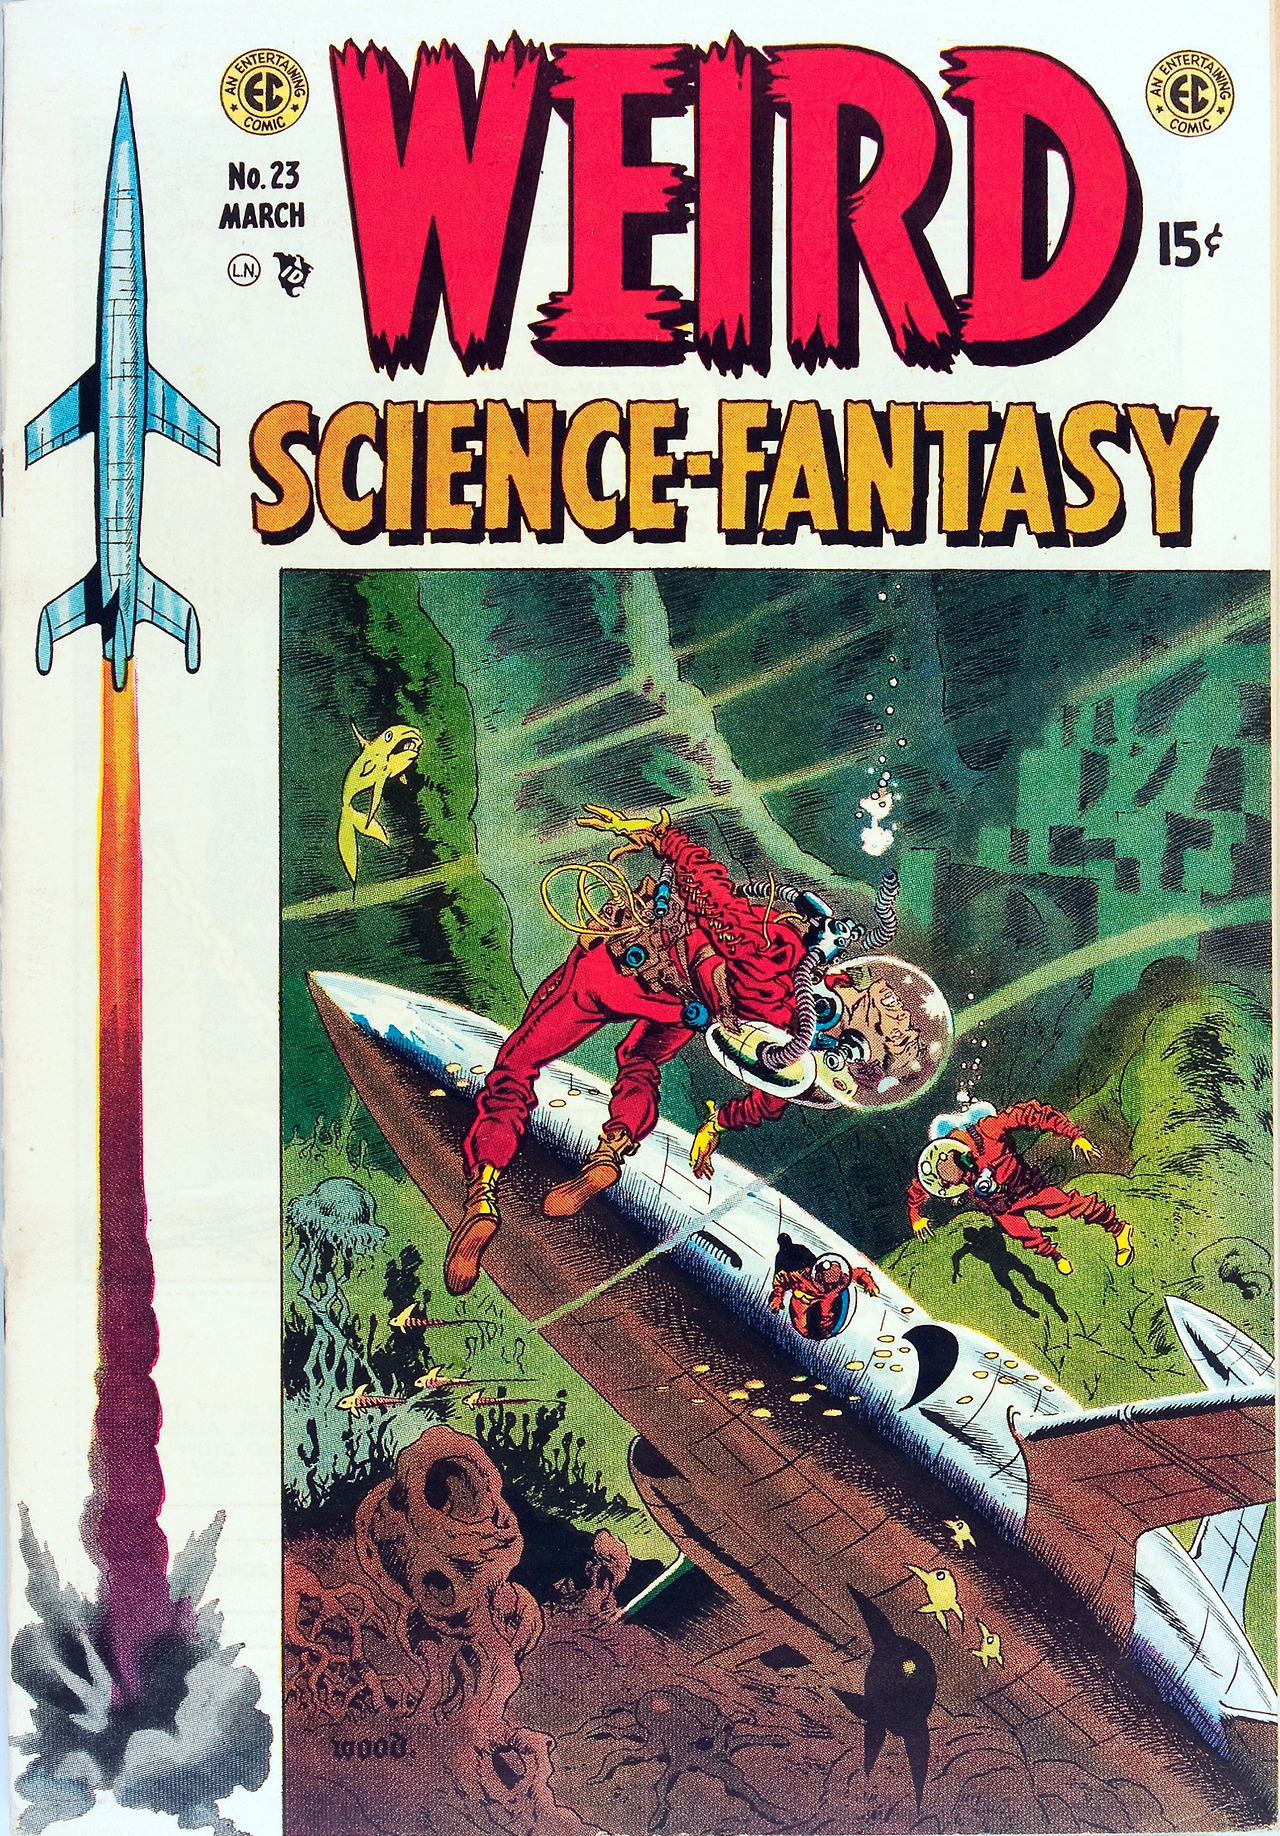 Image result for wallace wood ec science fiction covers weird science fantasy